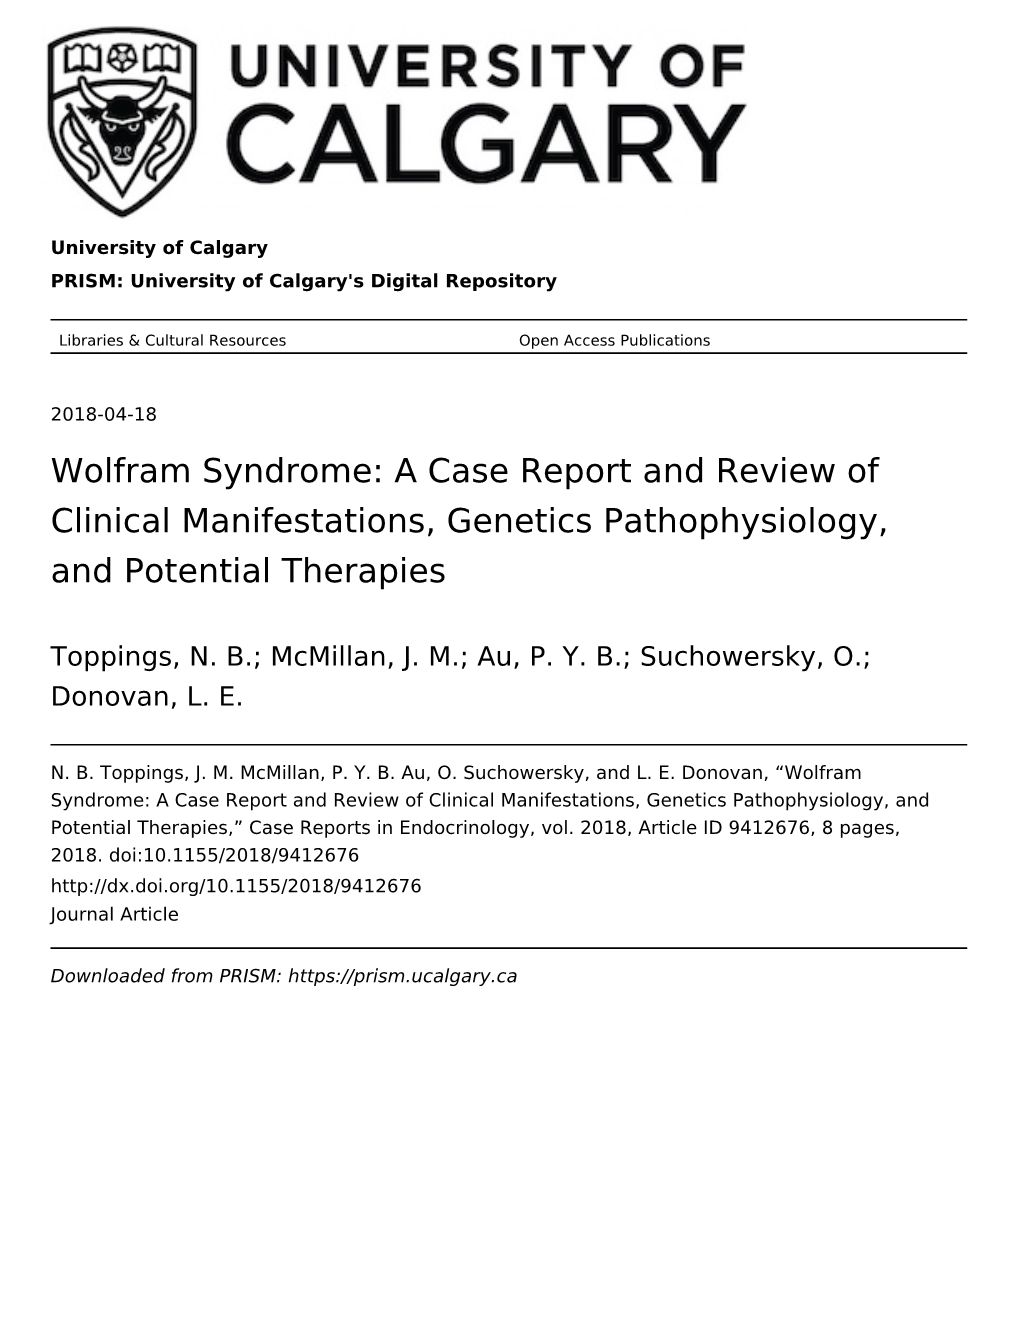 Wolfram Syndrome: a Case Report and Review of Clinical Manifestations, Genetics Pathophysiology, and Potential Therapies